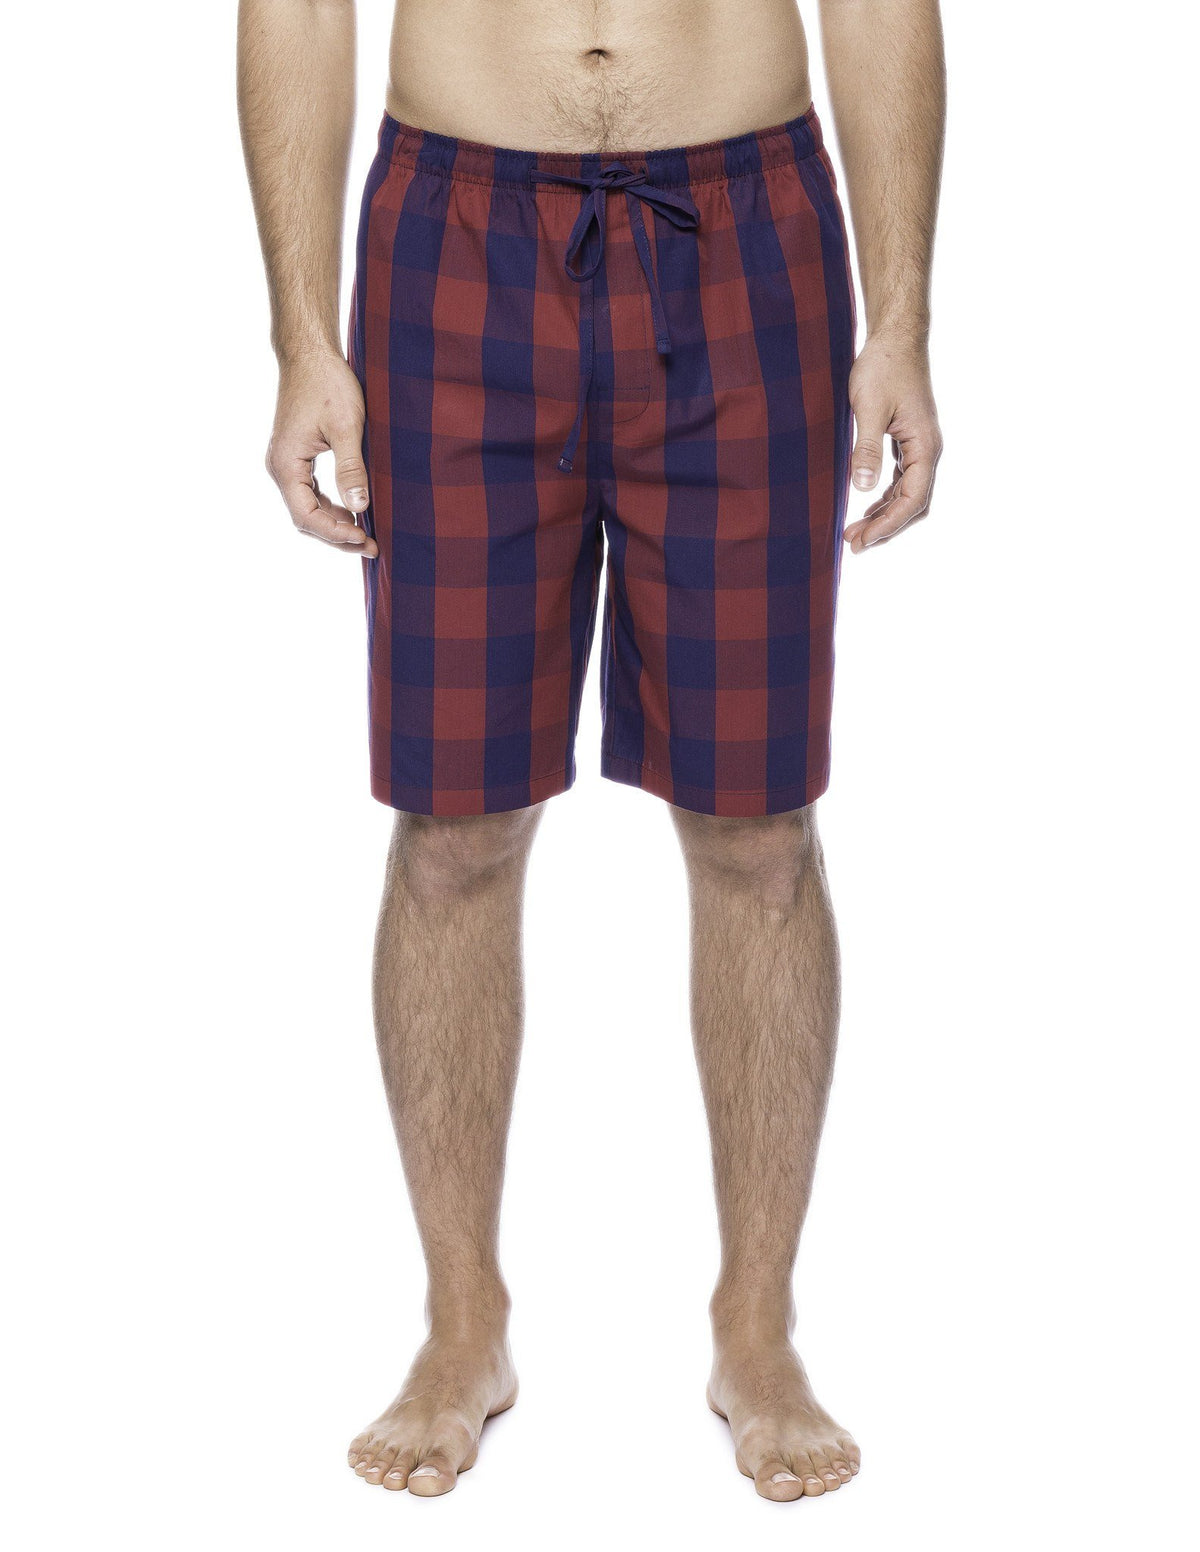 Men's 100% Woven Cotton Lounge Shorts - Gingham Red/Navy